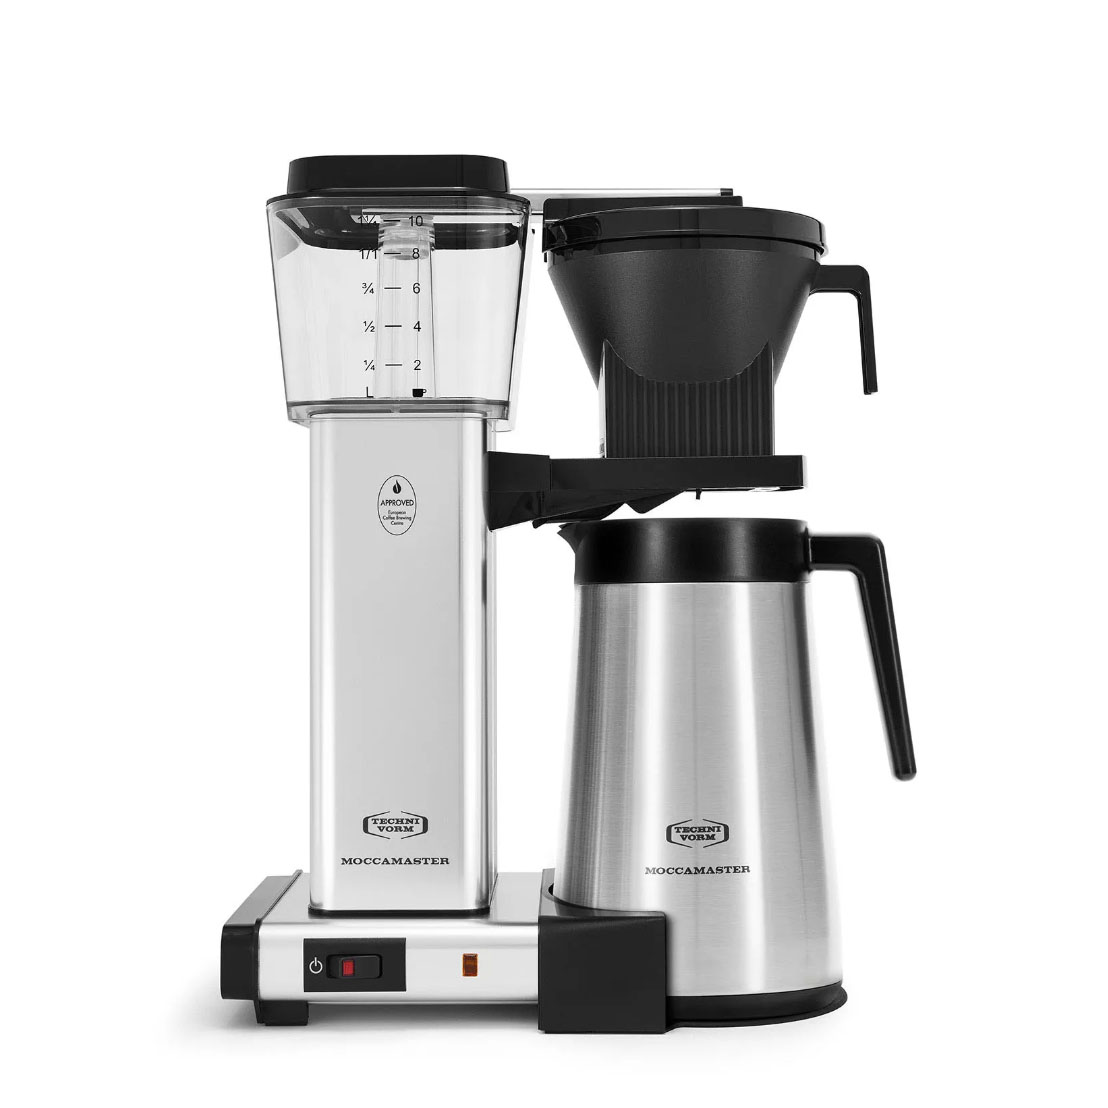 Stainless steel Moccamaster Coffee Maker With Thermal Carafe